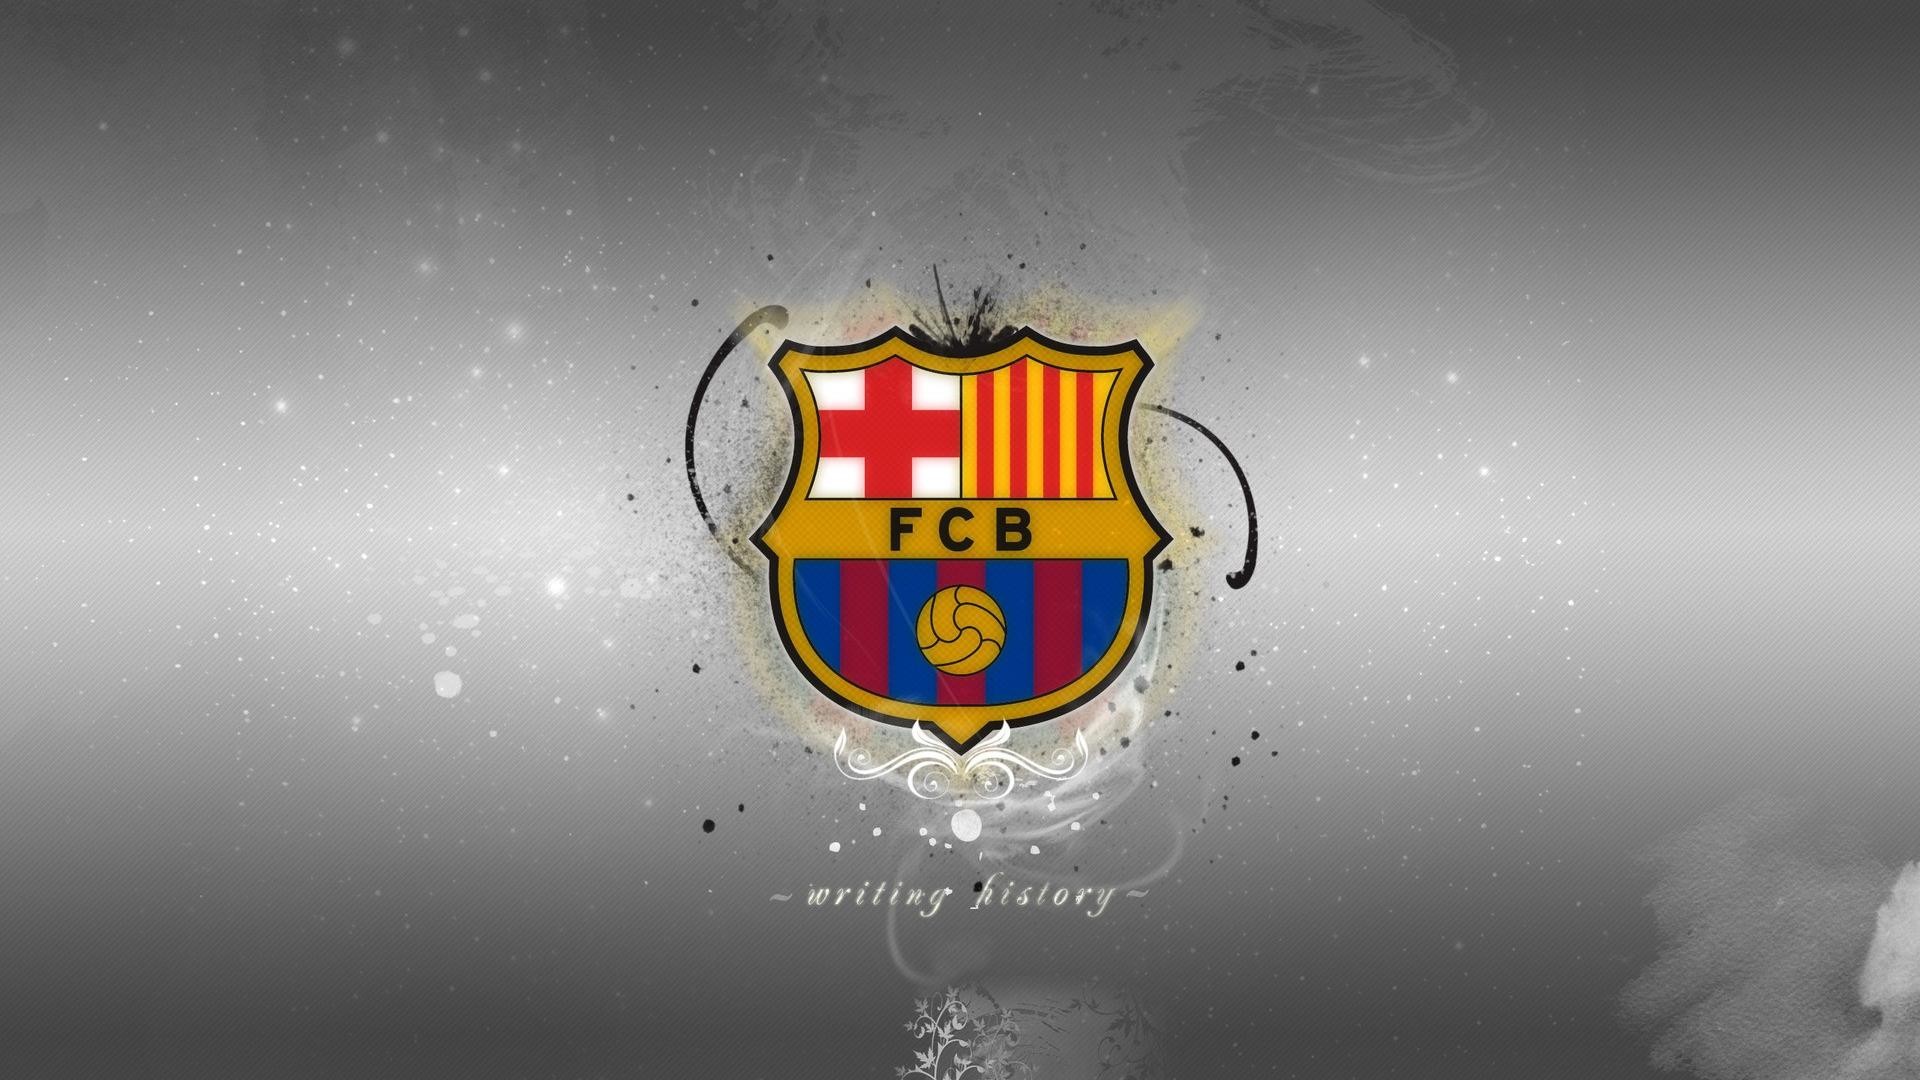 Fcb HD Wallpapers 2018 (85+ images)